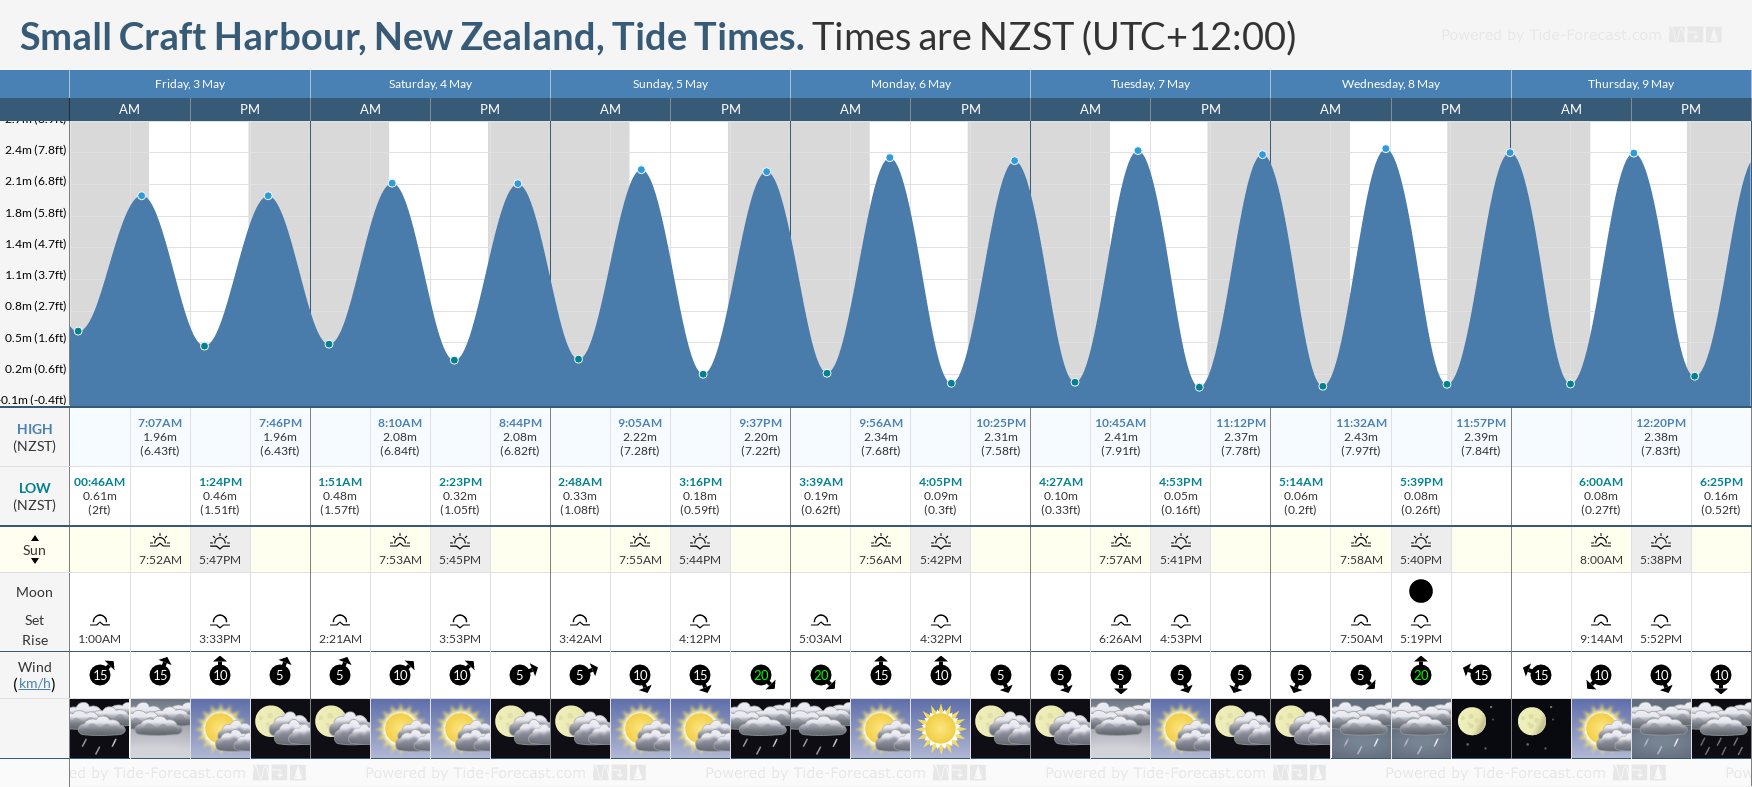 Small Craft Harbour, New Zealand Tide Chart including high and low tide tide times for the next 7 days